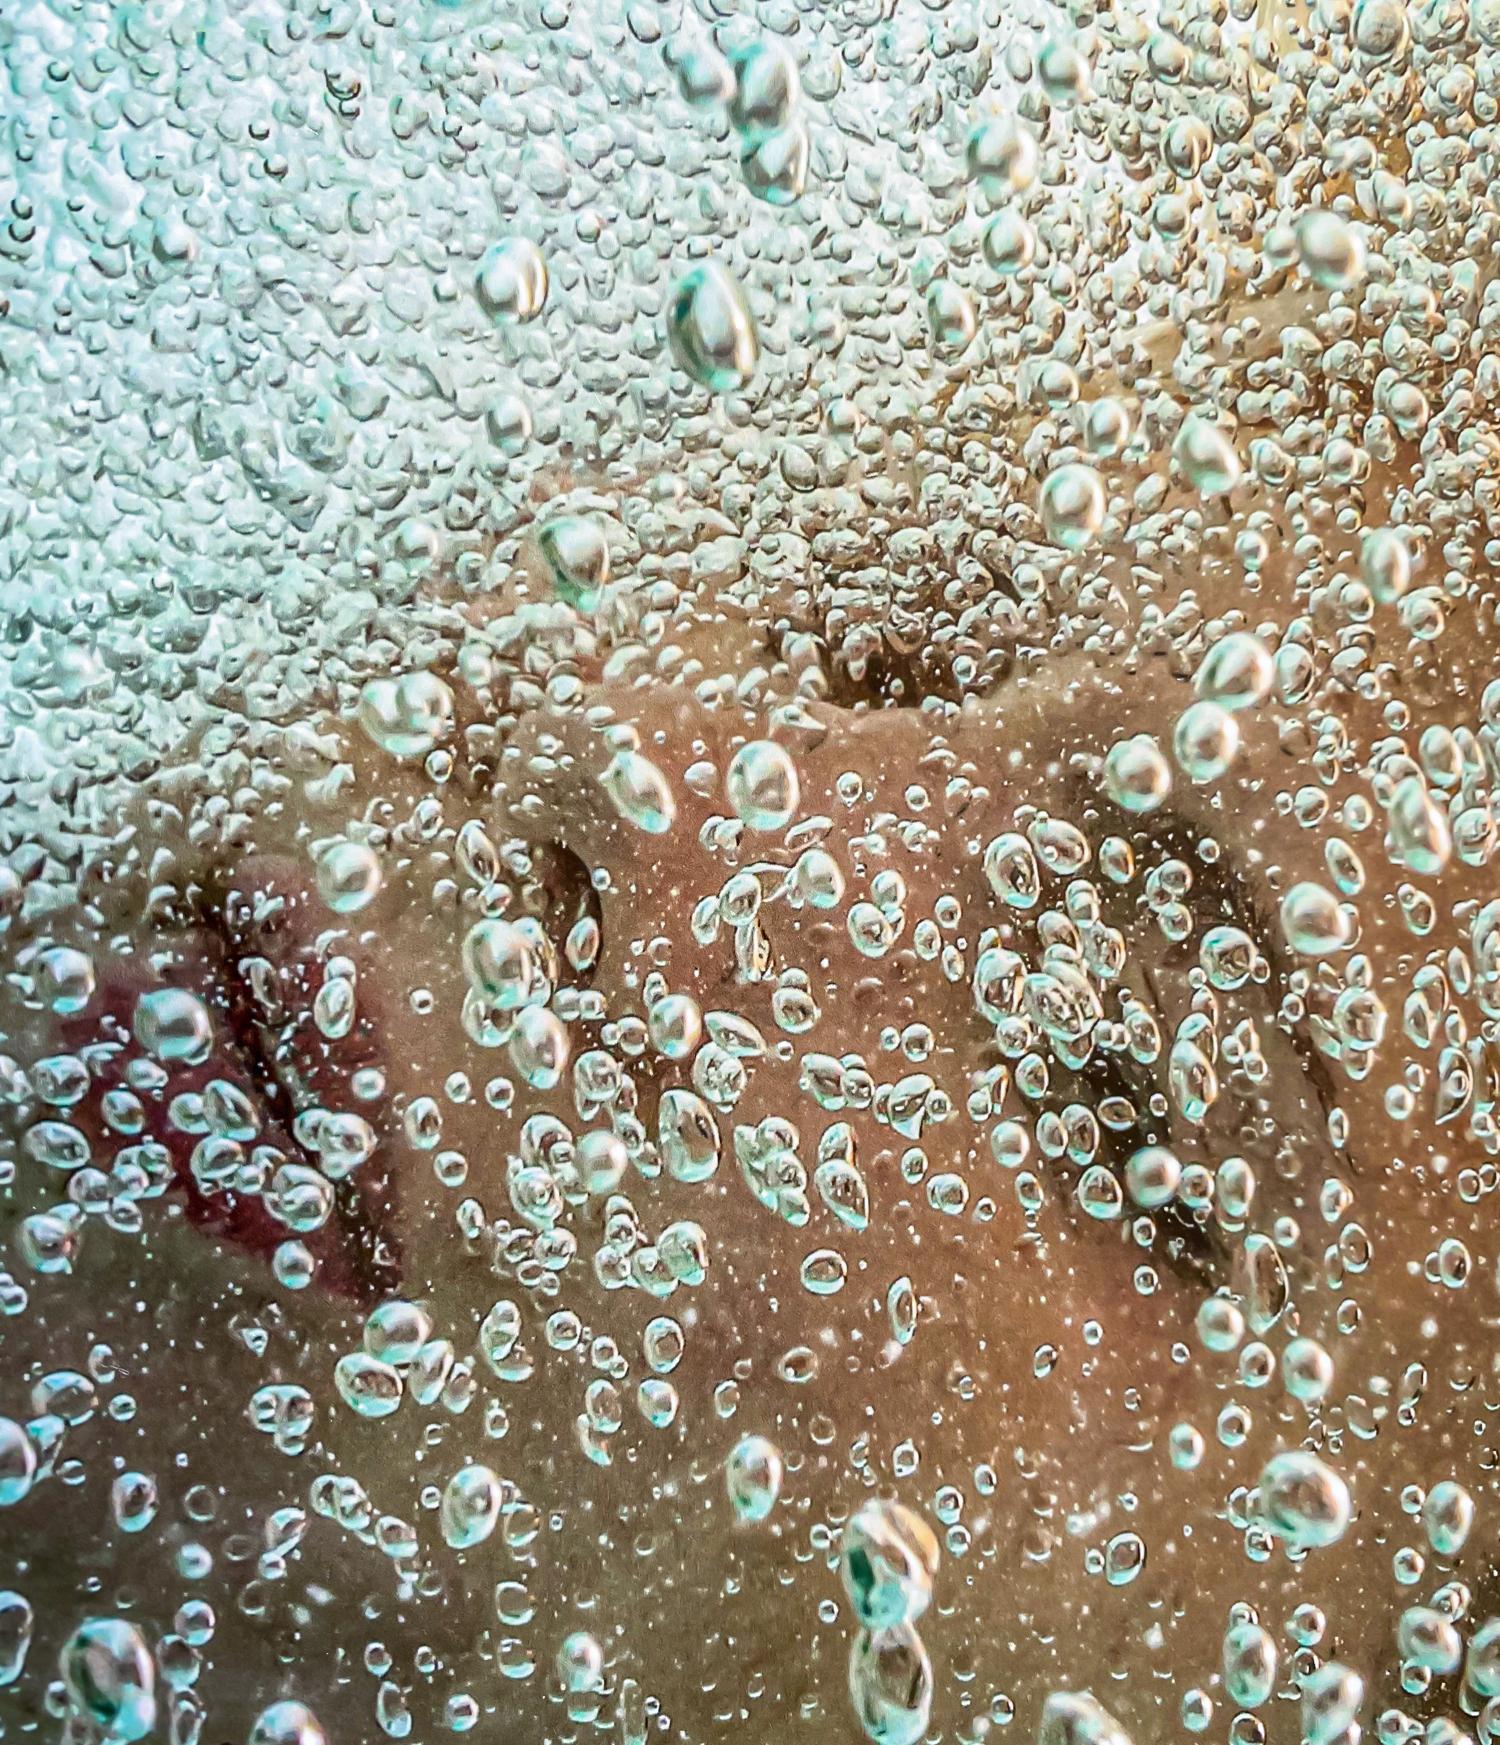 Sweet Champagne - underwater photograph - archival pigment print 18 x 24